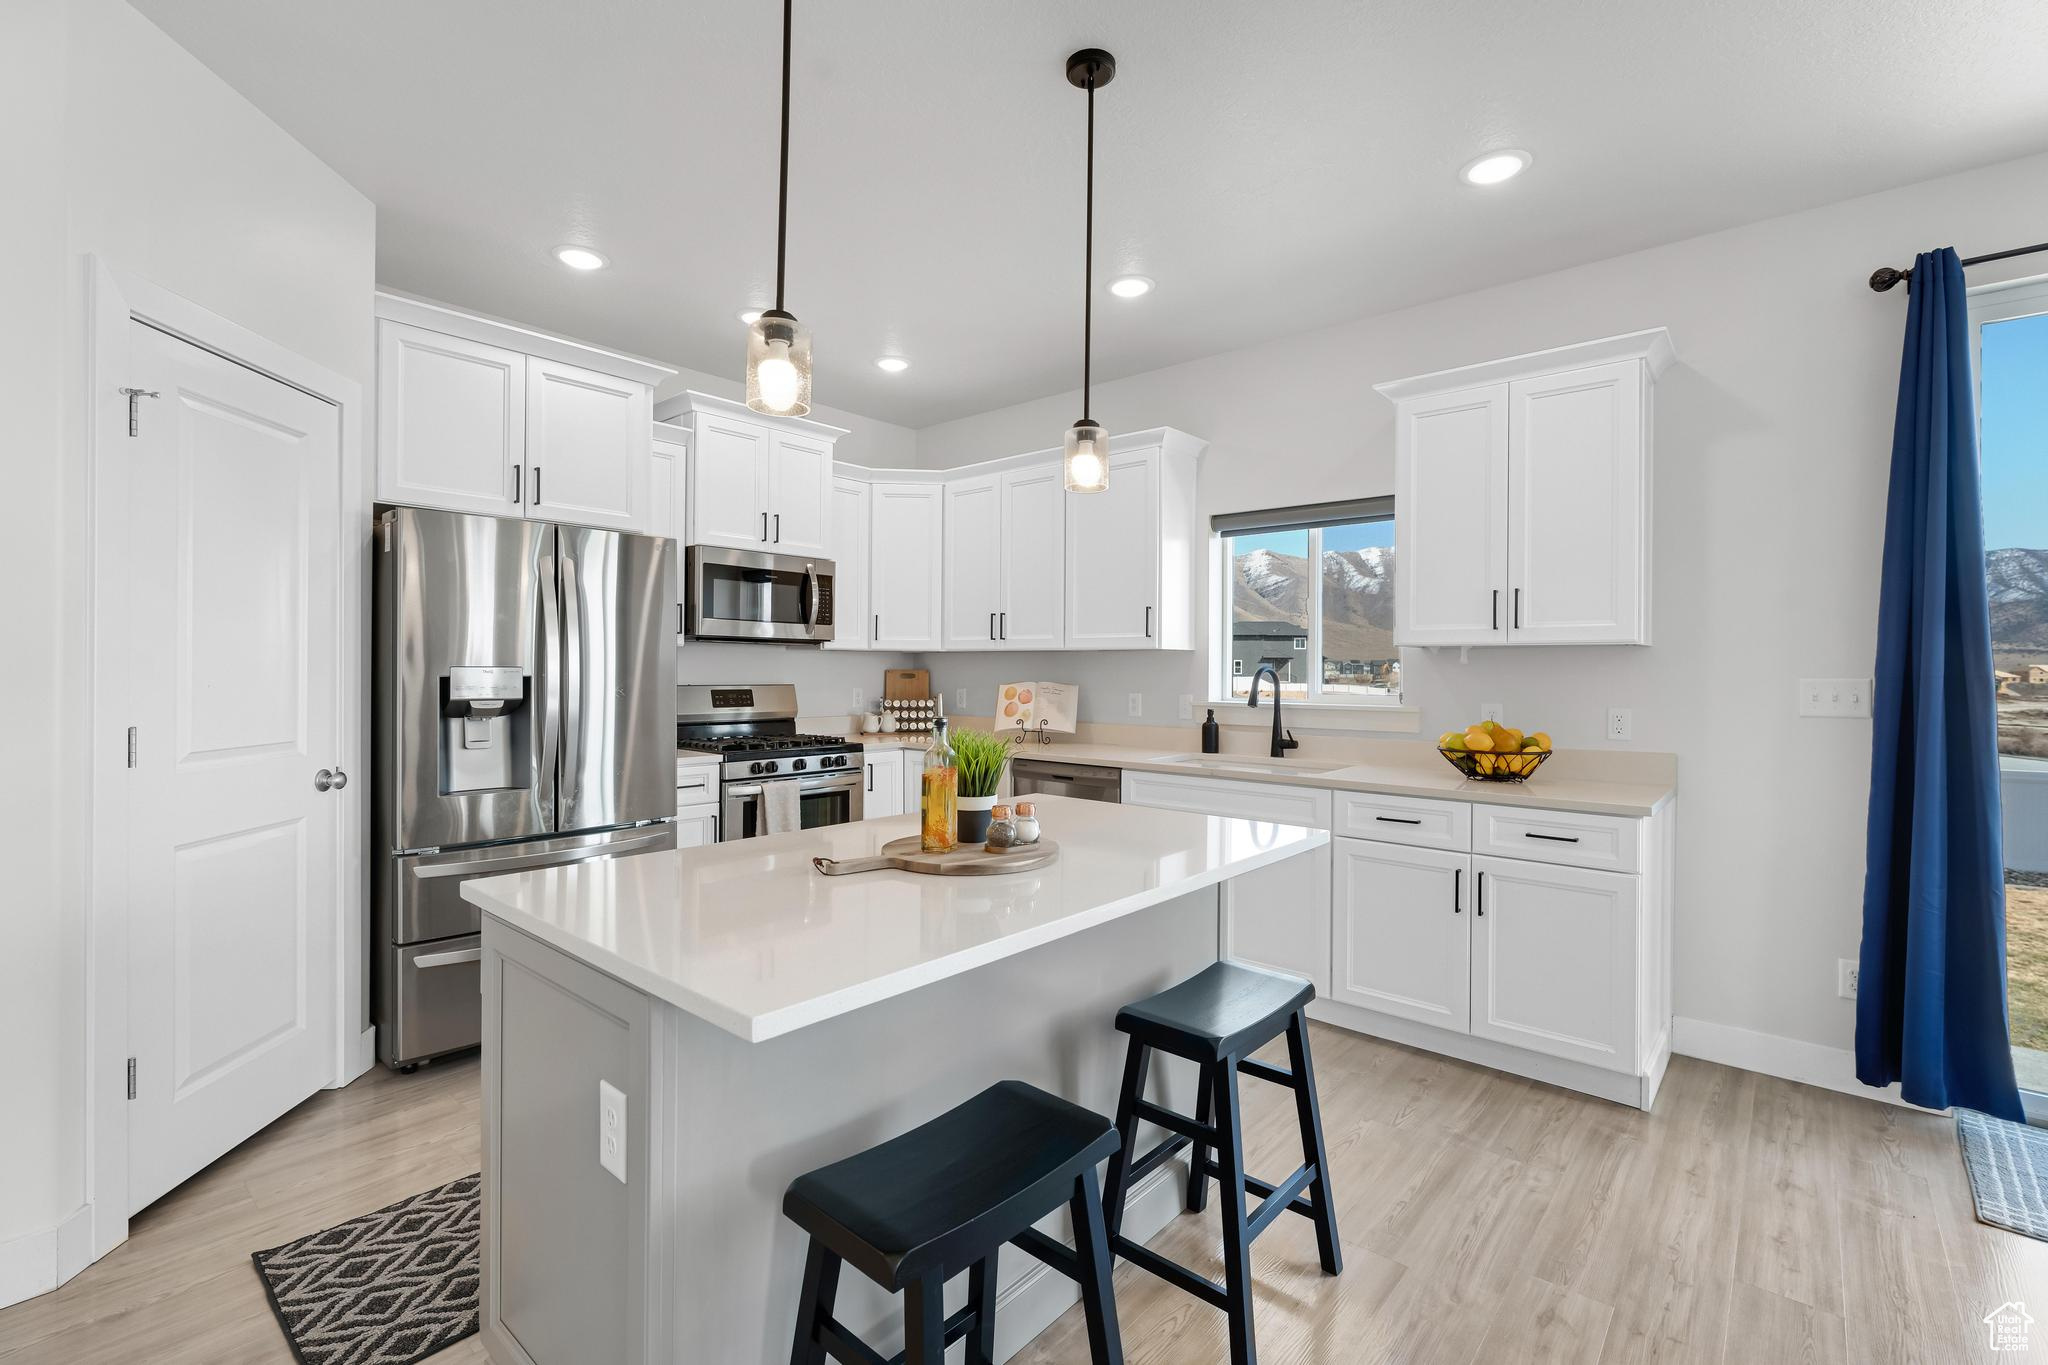 Kitchen Featuring Quartz Countertops, Upgraded  Lighting and Fixtures, Stainless Appliances